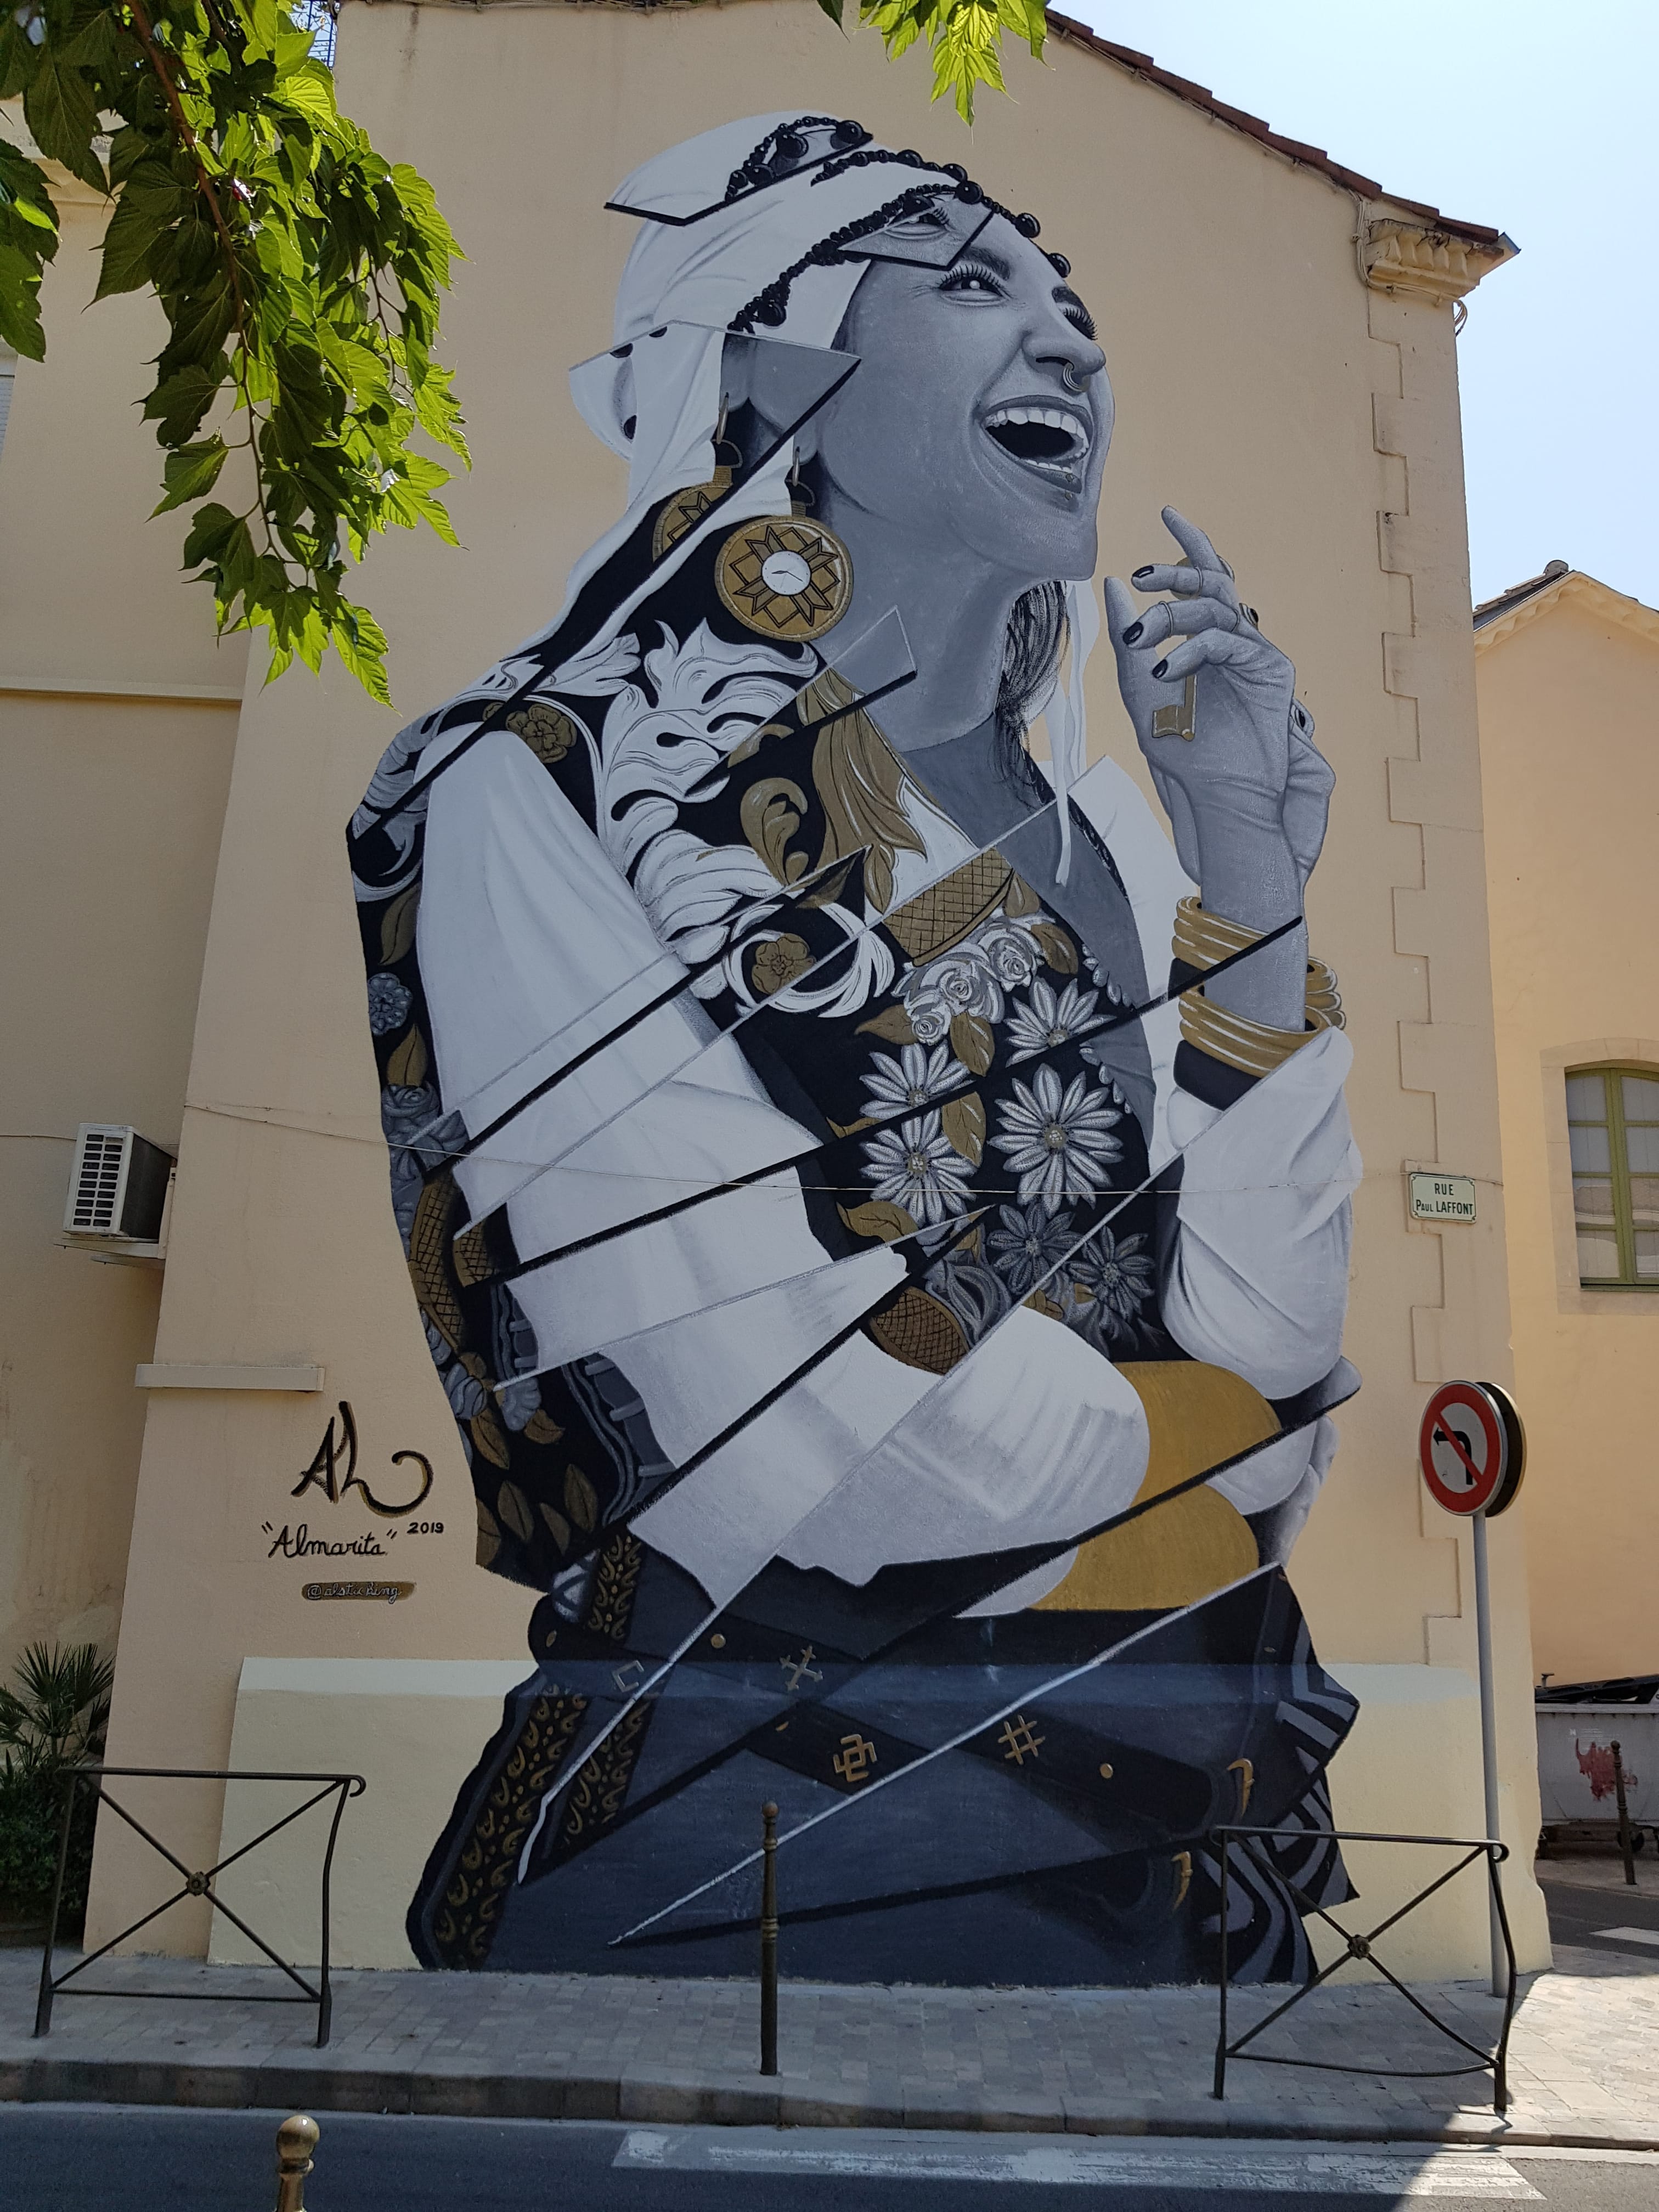 Graffiti 6258 Almarita by the artist Al sticking captured by Mephisroth in Narbonne France